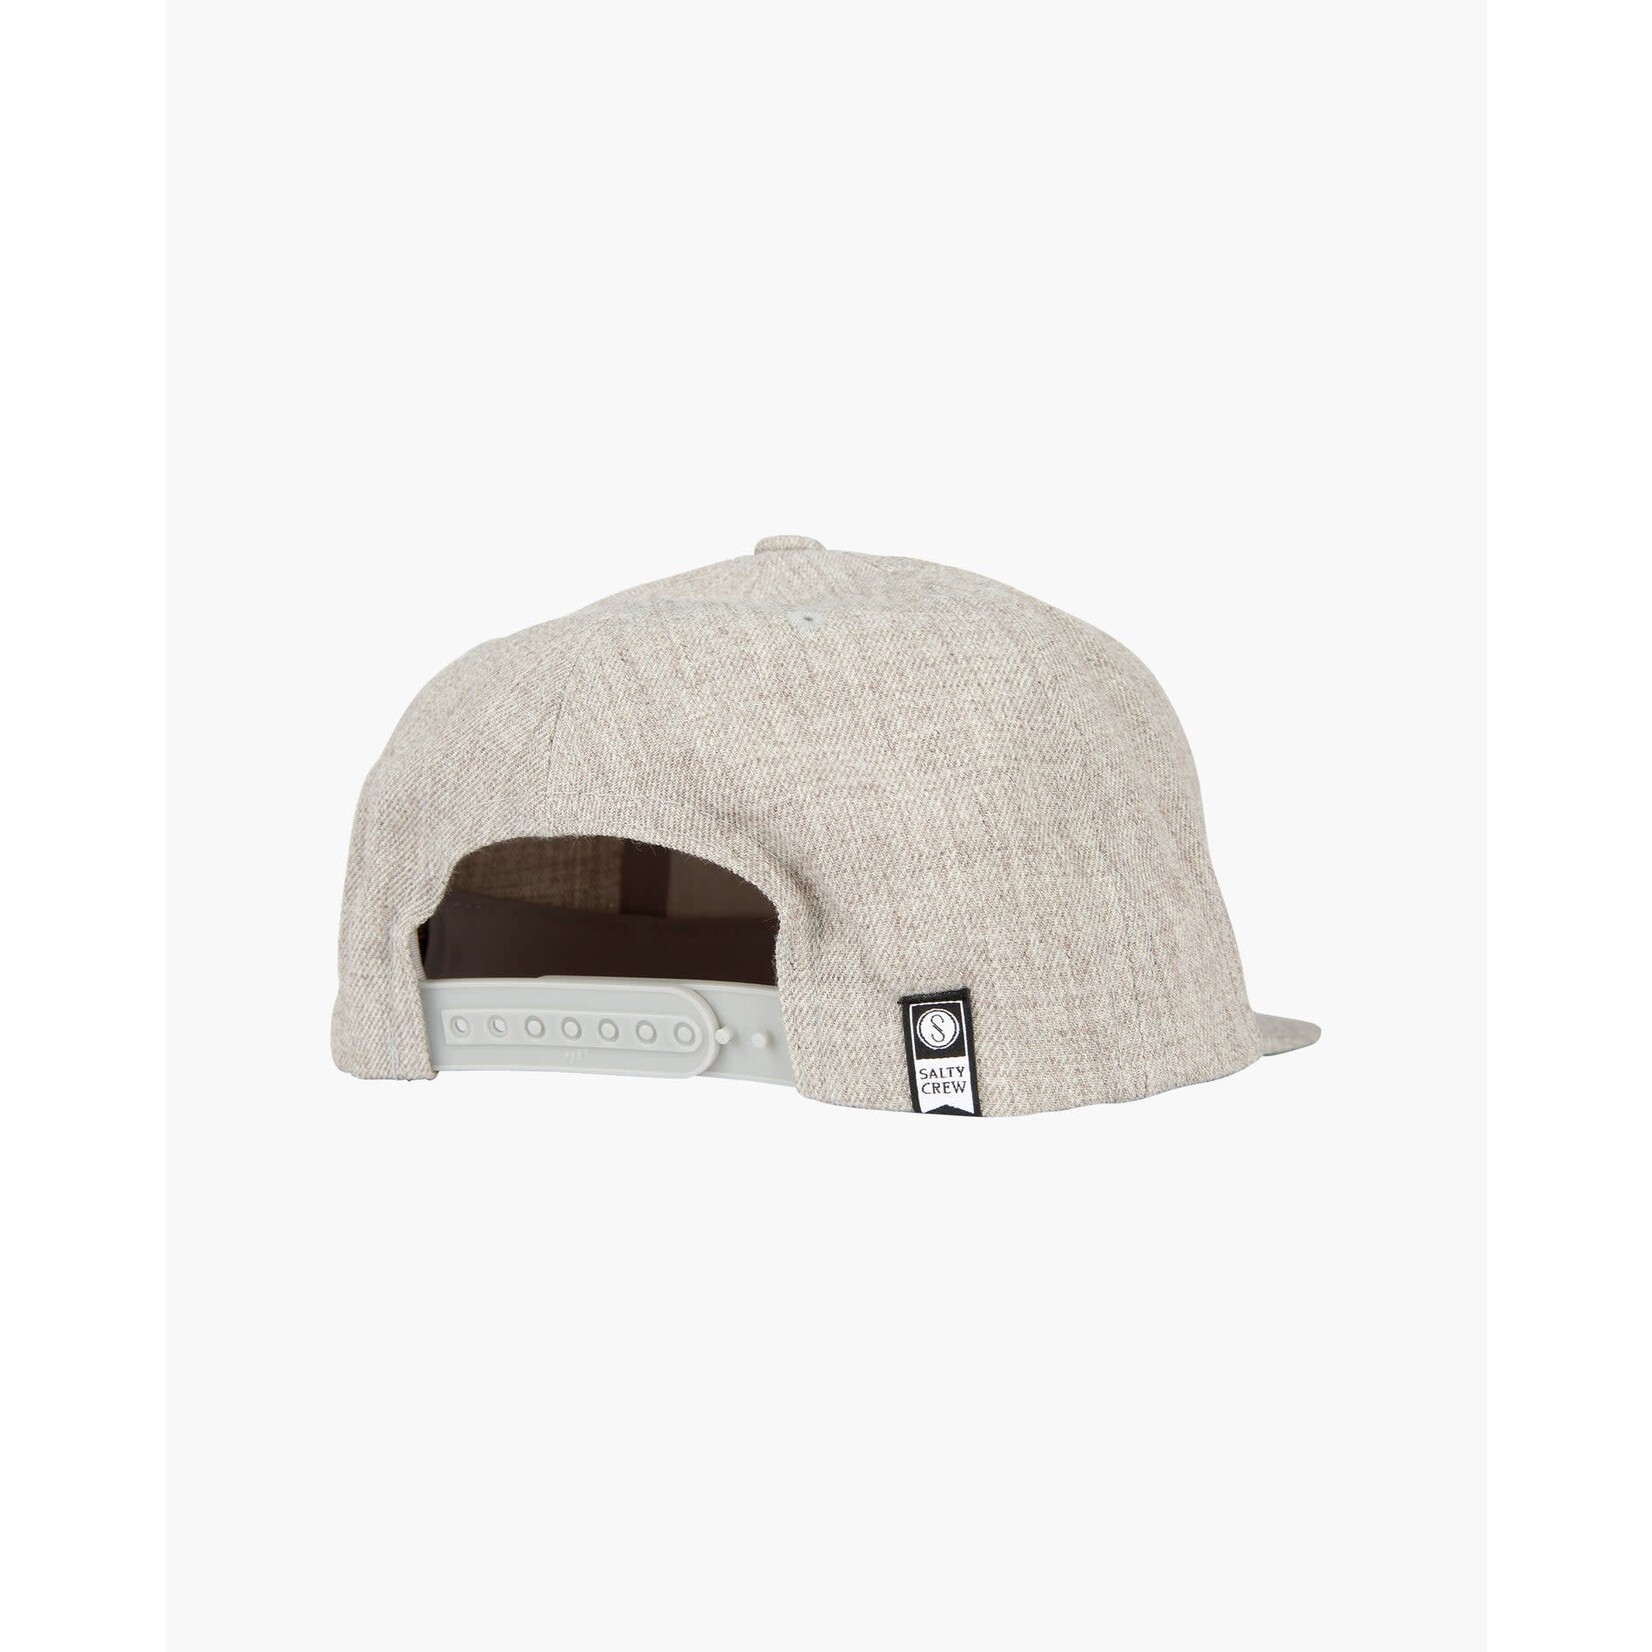 Salty Crew Salty Crew High Tail 5 Panel Snapback Hat - Oatmeal